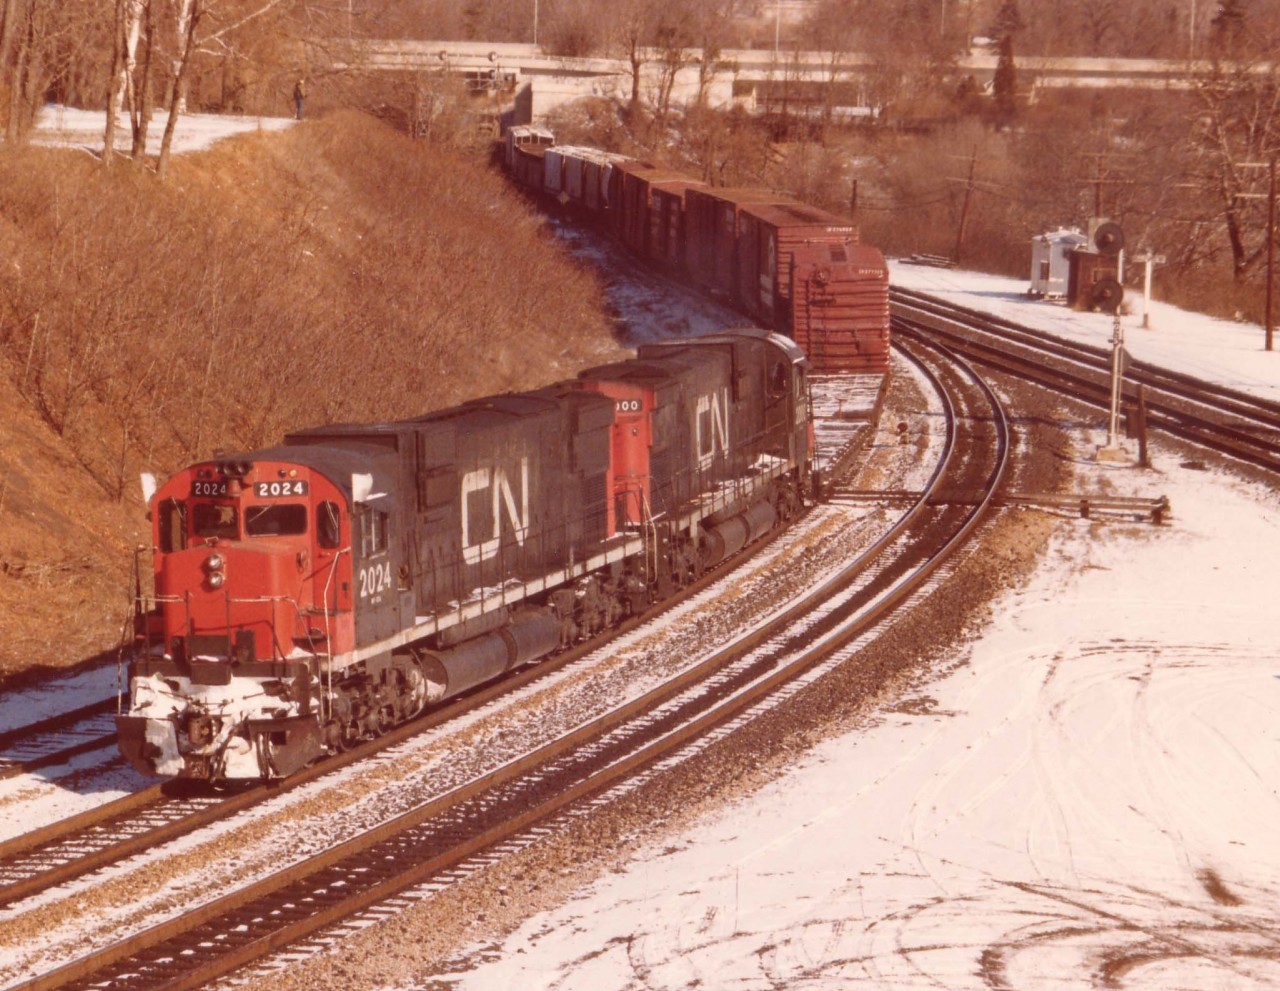 CN train #401 was a daily 'treat' for the fans. You never knew what kind of power would be on it. The railfan routine was to go into Hamilton's Stuart St yard and find out; for in the mornings this train would back out of Hamilton until clear of the Junction at Bayview and then get lined up westward up the Dundas Sub.
Today's CN 2024 and 2000, a pair of C-630Ms made for an eventful chase and I followed this train as far as Paris.
All locomotives in this series were off the CN roster by 1996.